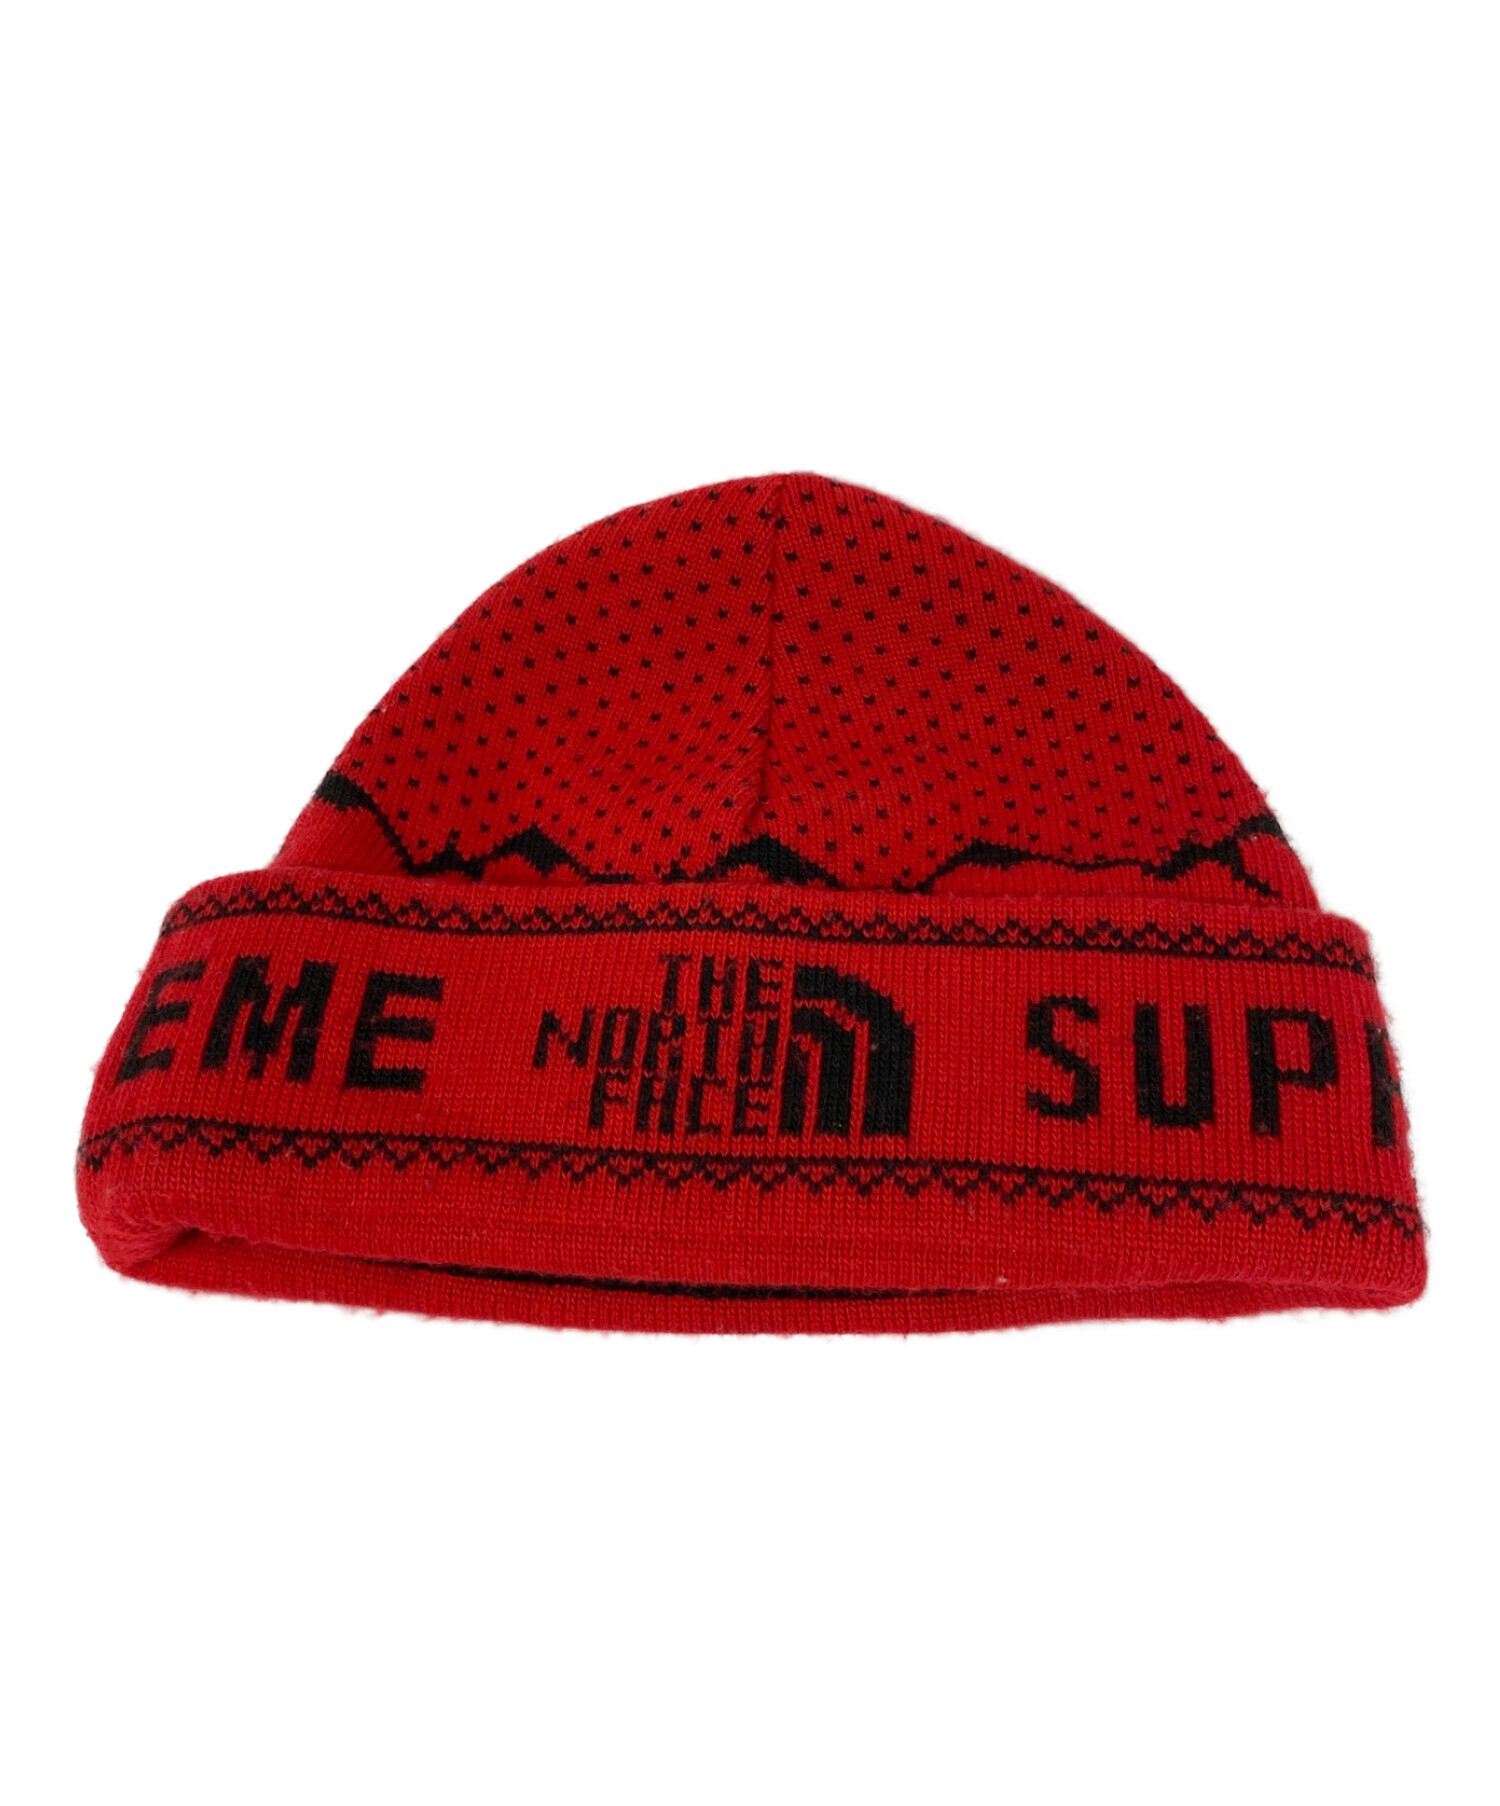 Supreme　THE NORTH FACE　ビーニー　レッド